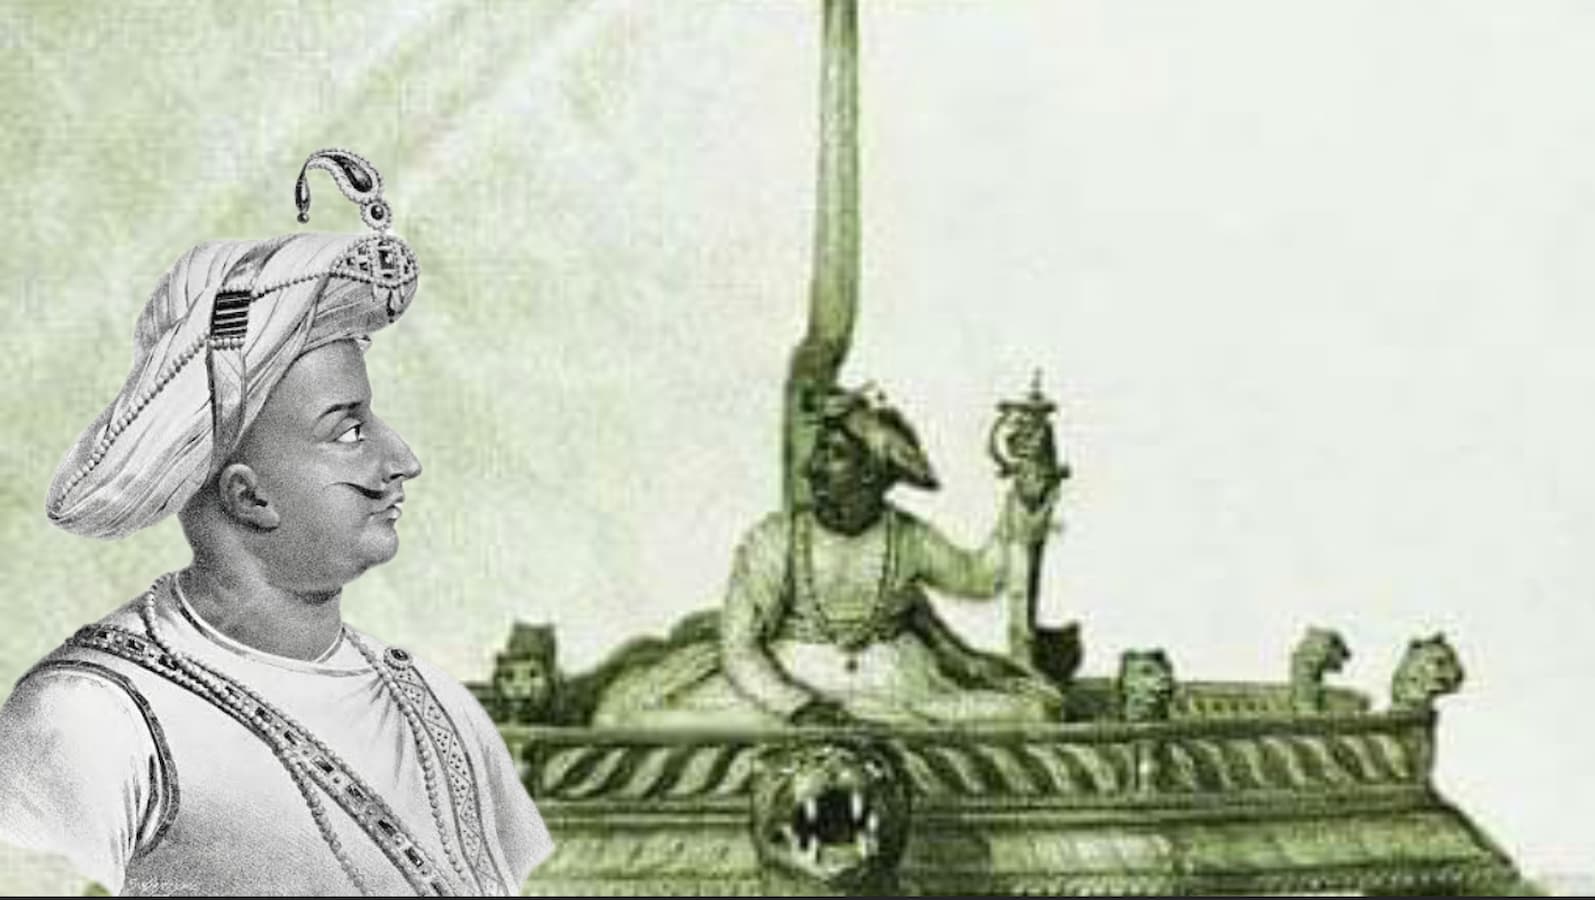 Tipu Sultan, the ‘Tiger of Mysore’, was a great visionary who exposed the expansionist designs of the British imperial forces.